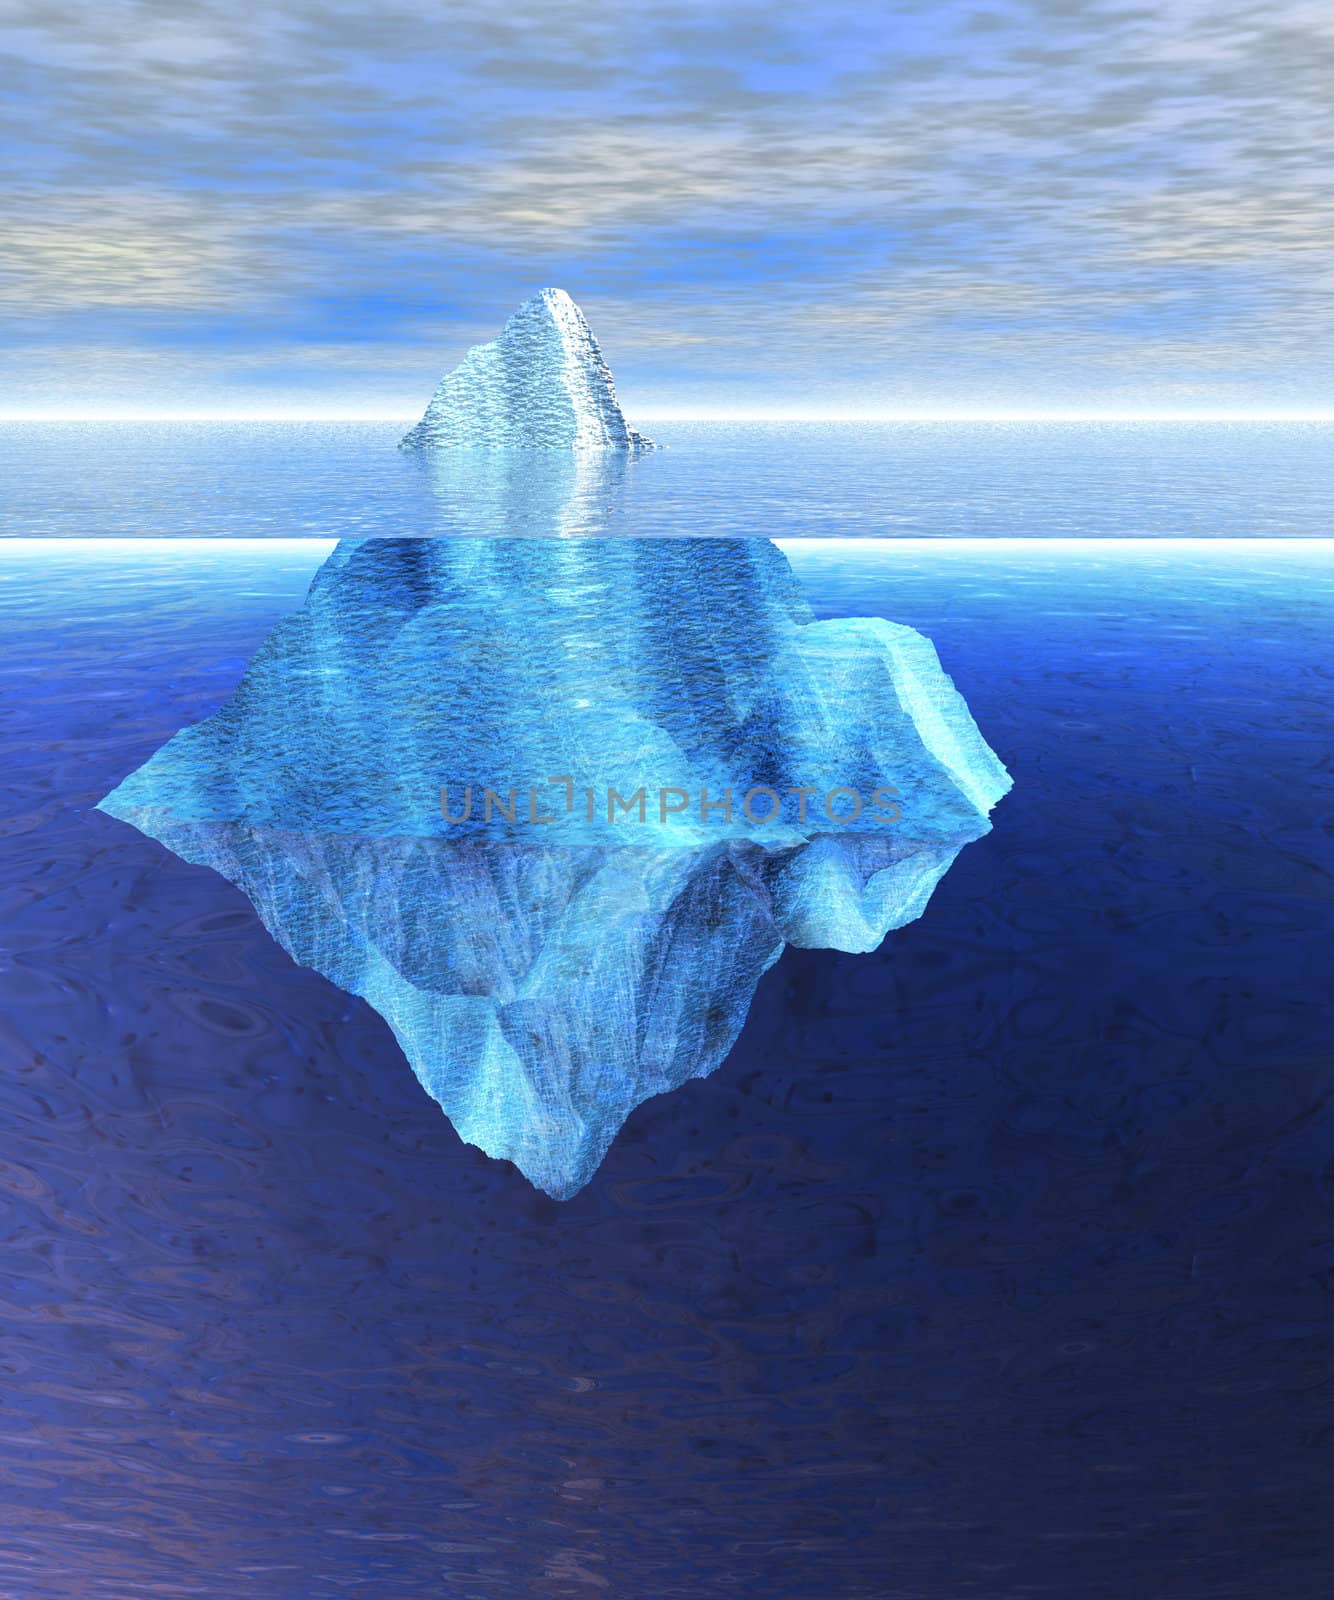 Floating Iceberg in the Open Ocean with Horizon During the day d by bobbigmac